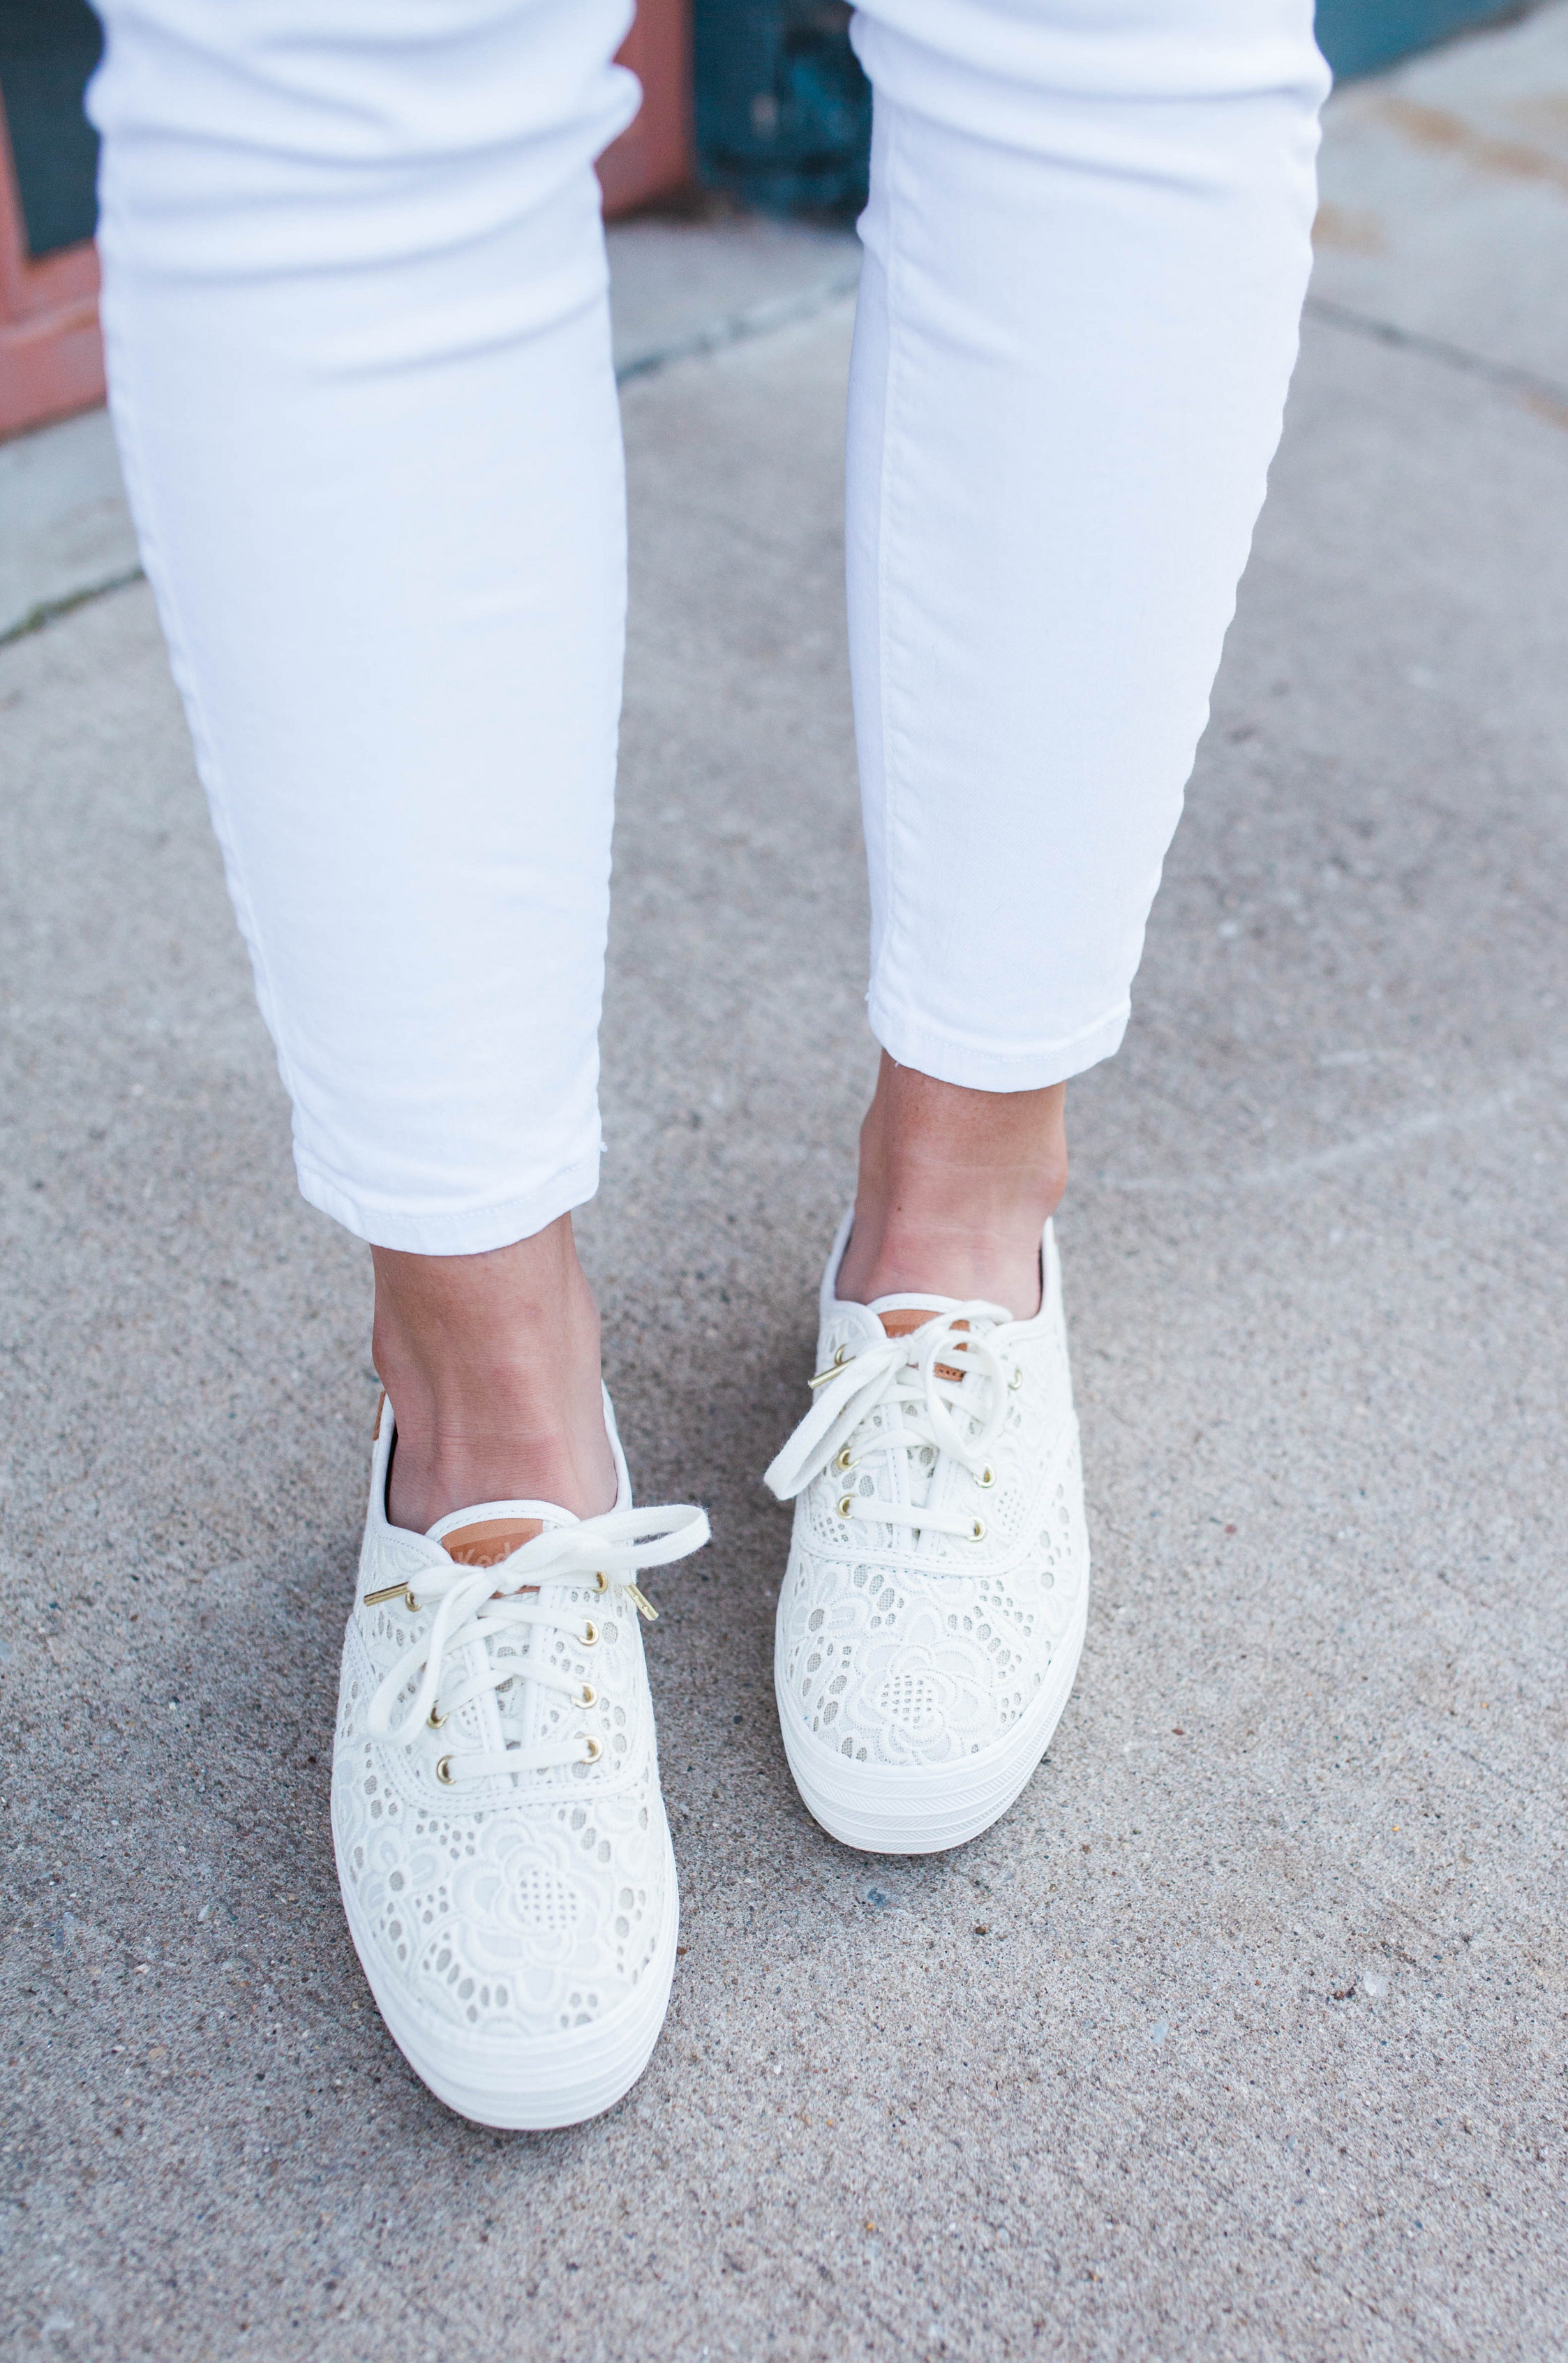 Keds X Zappos / Buy your Keds at Zappos